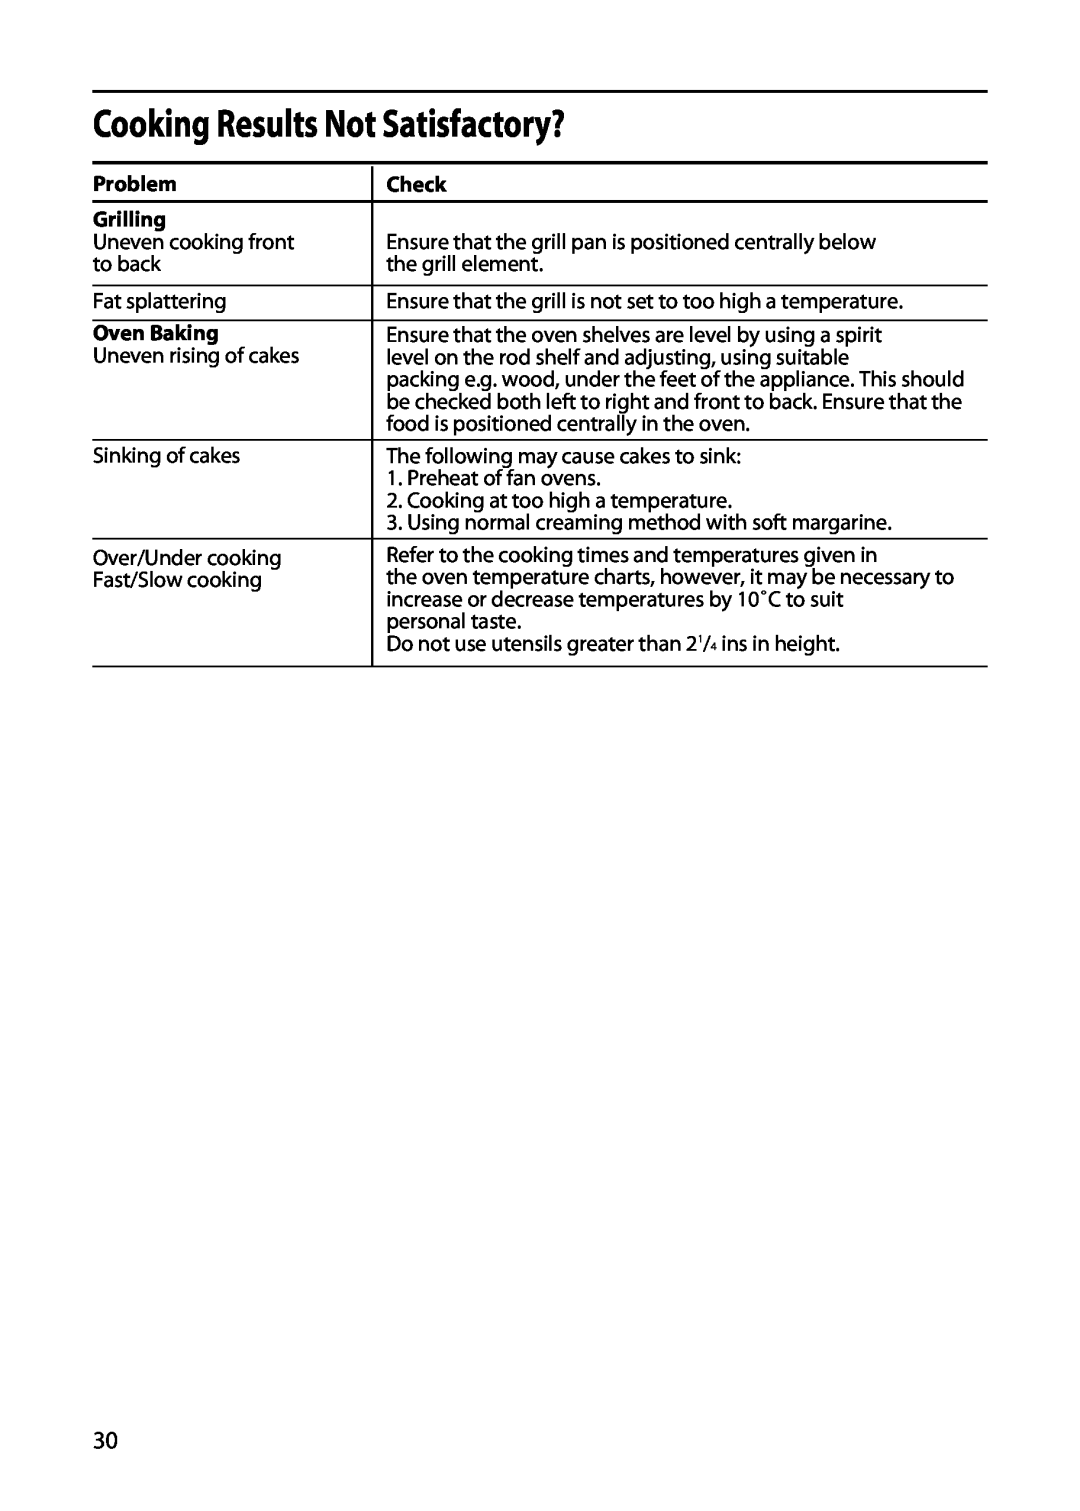 Hotpoint 5TCC manual Cooking Results Not Satisfactory?, Problem, Check, Grilling, Oven Baking 